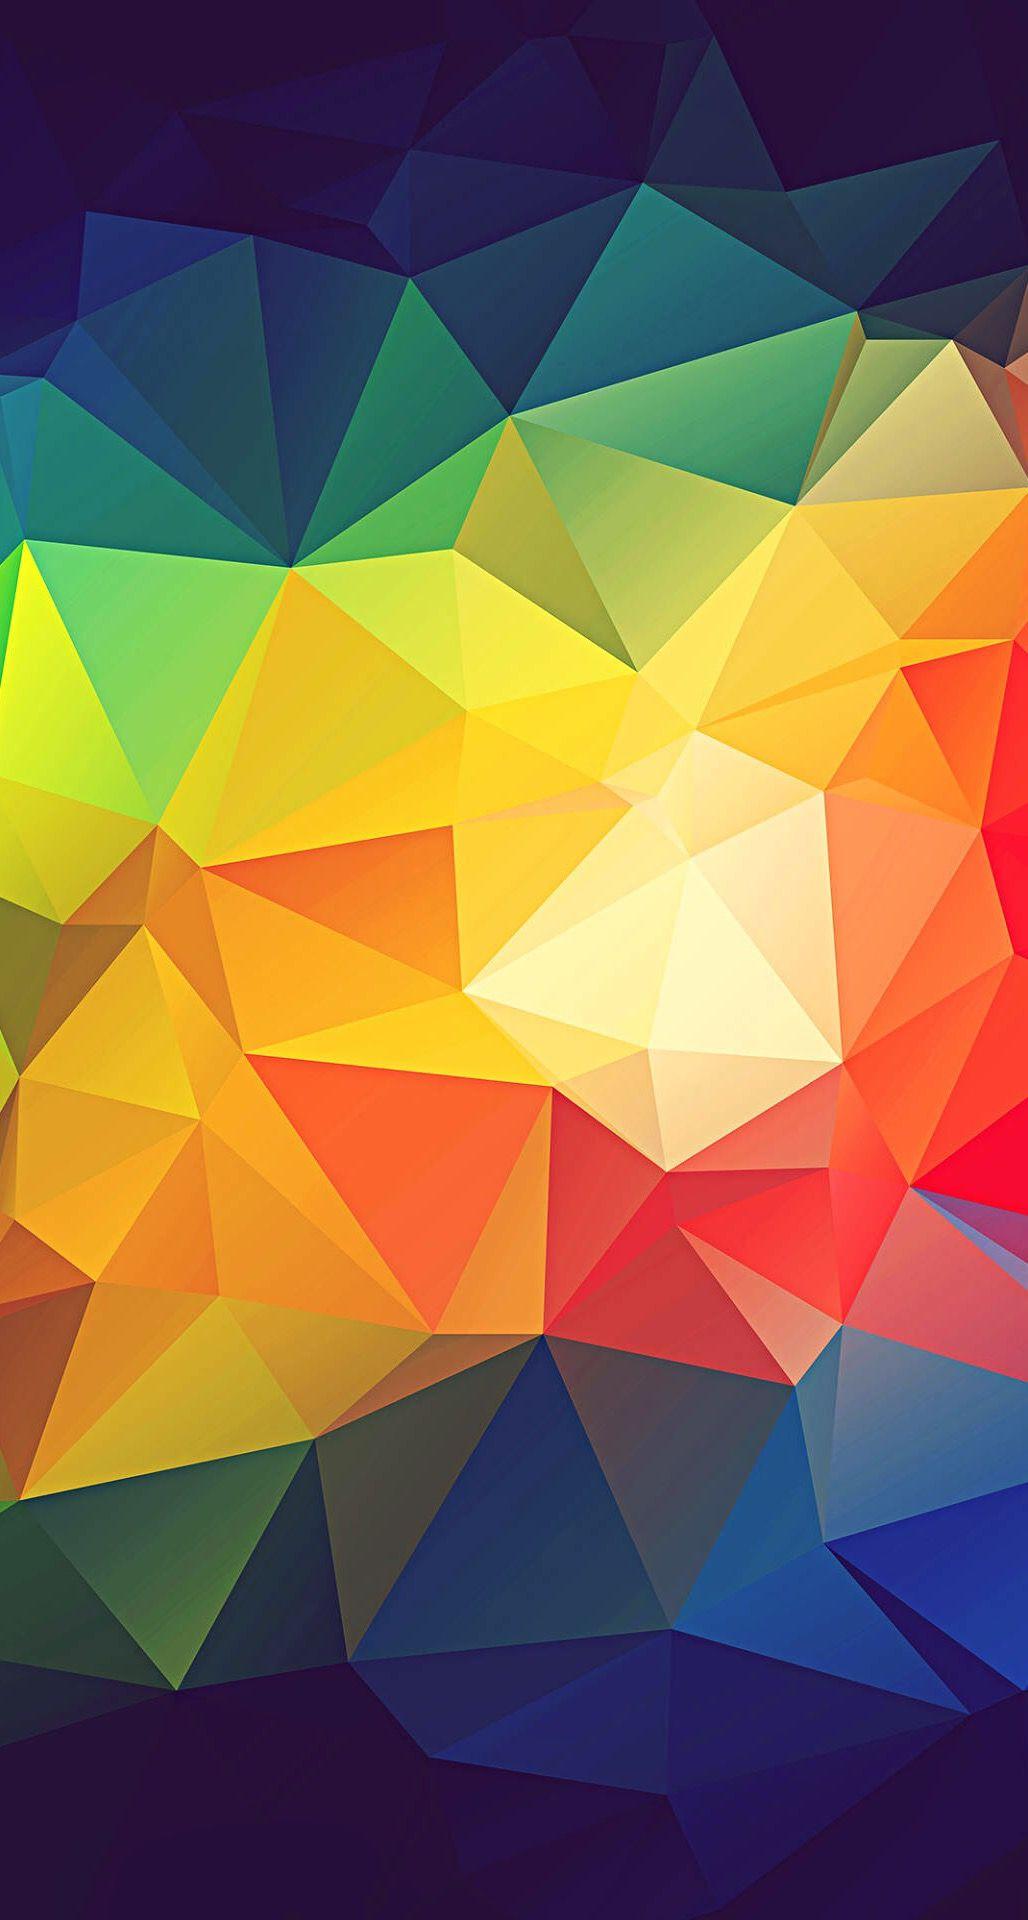 Clever Abstract iPhone Wallpaper For Art Lovers. Triangle